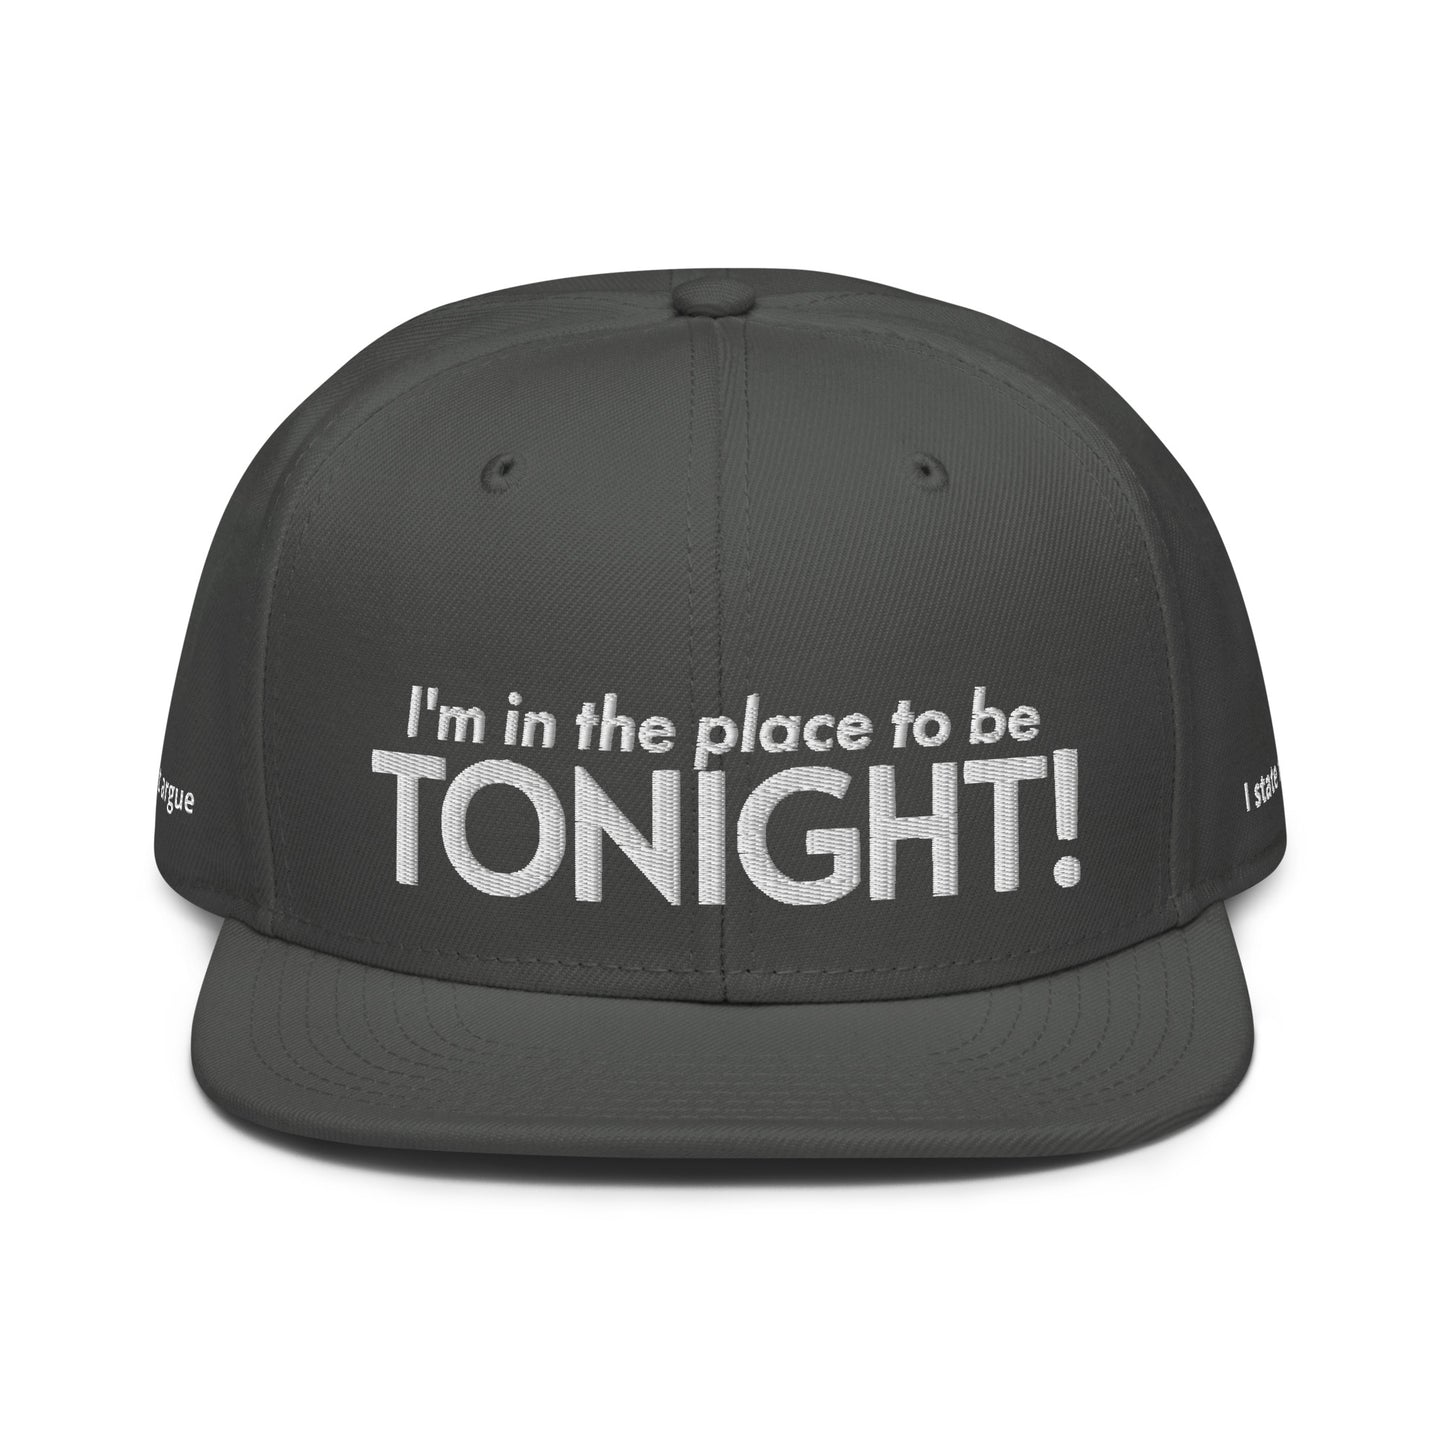 MAAT FOREVER TONIGHT Snapback Hat